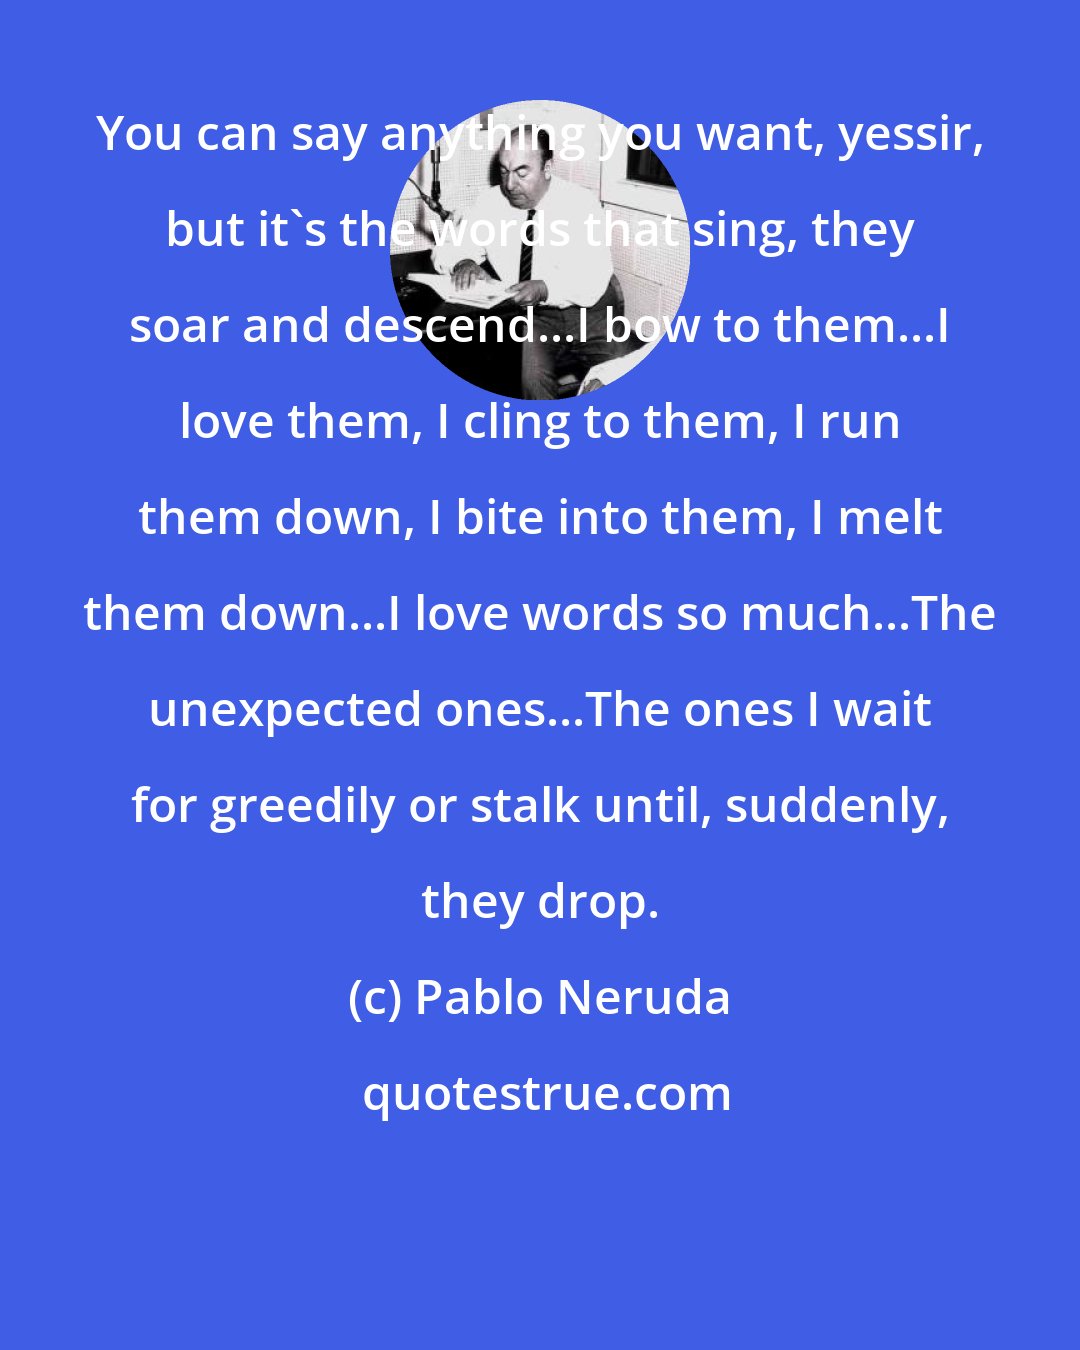 Pablo Neruda: You can say anything you want, yessir, but it's the words that sing, they soar and descend...I bow to them...I love them, I cling to them, I run them down, I bite into them, I melt them down...I love words so much...The unexpected ones...The ones I wait for greedily or stalk until, suddenly, they drop.